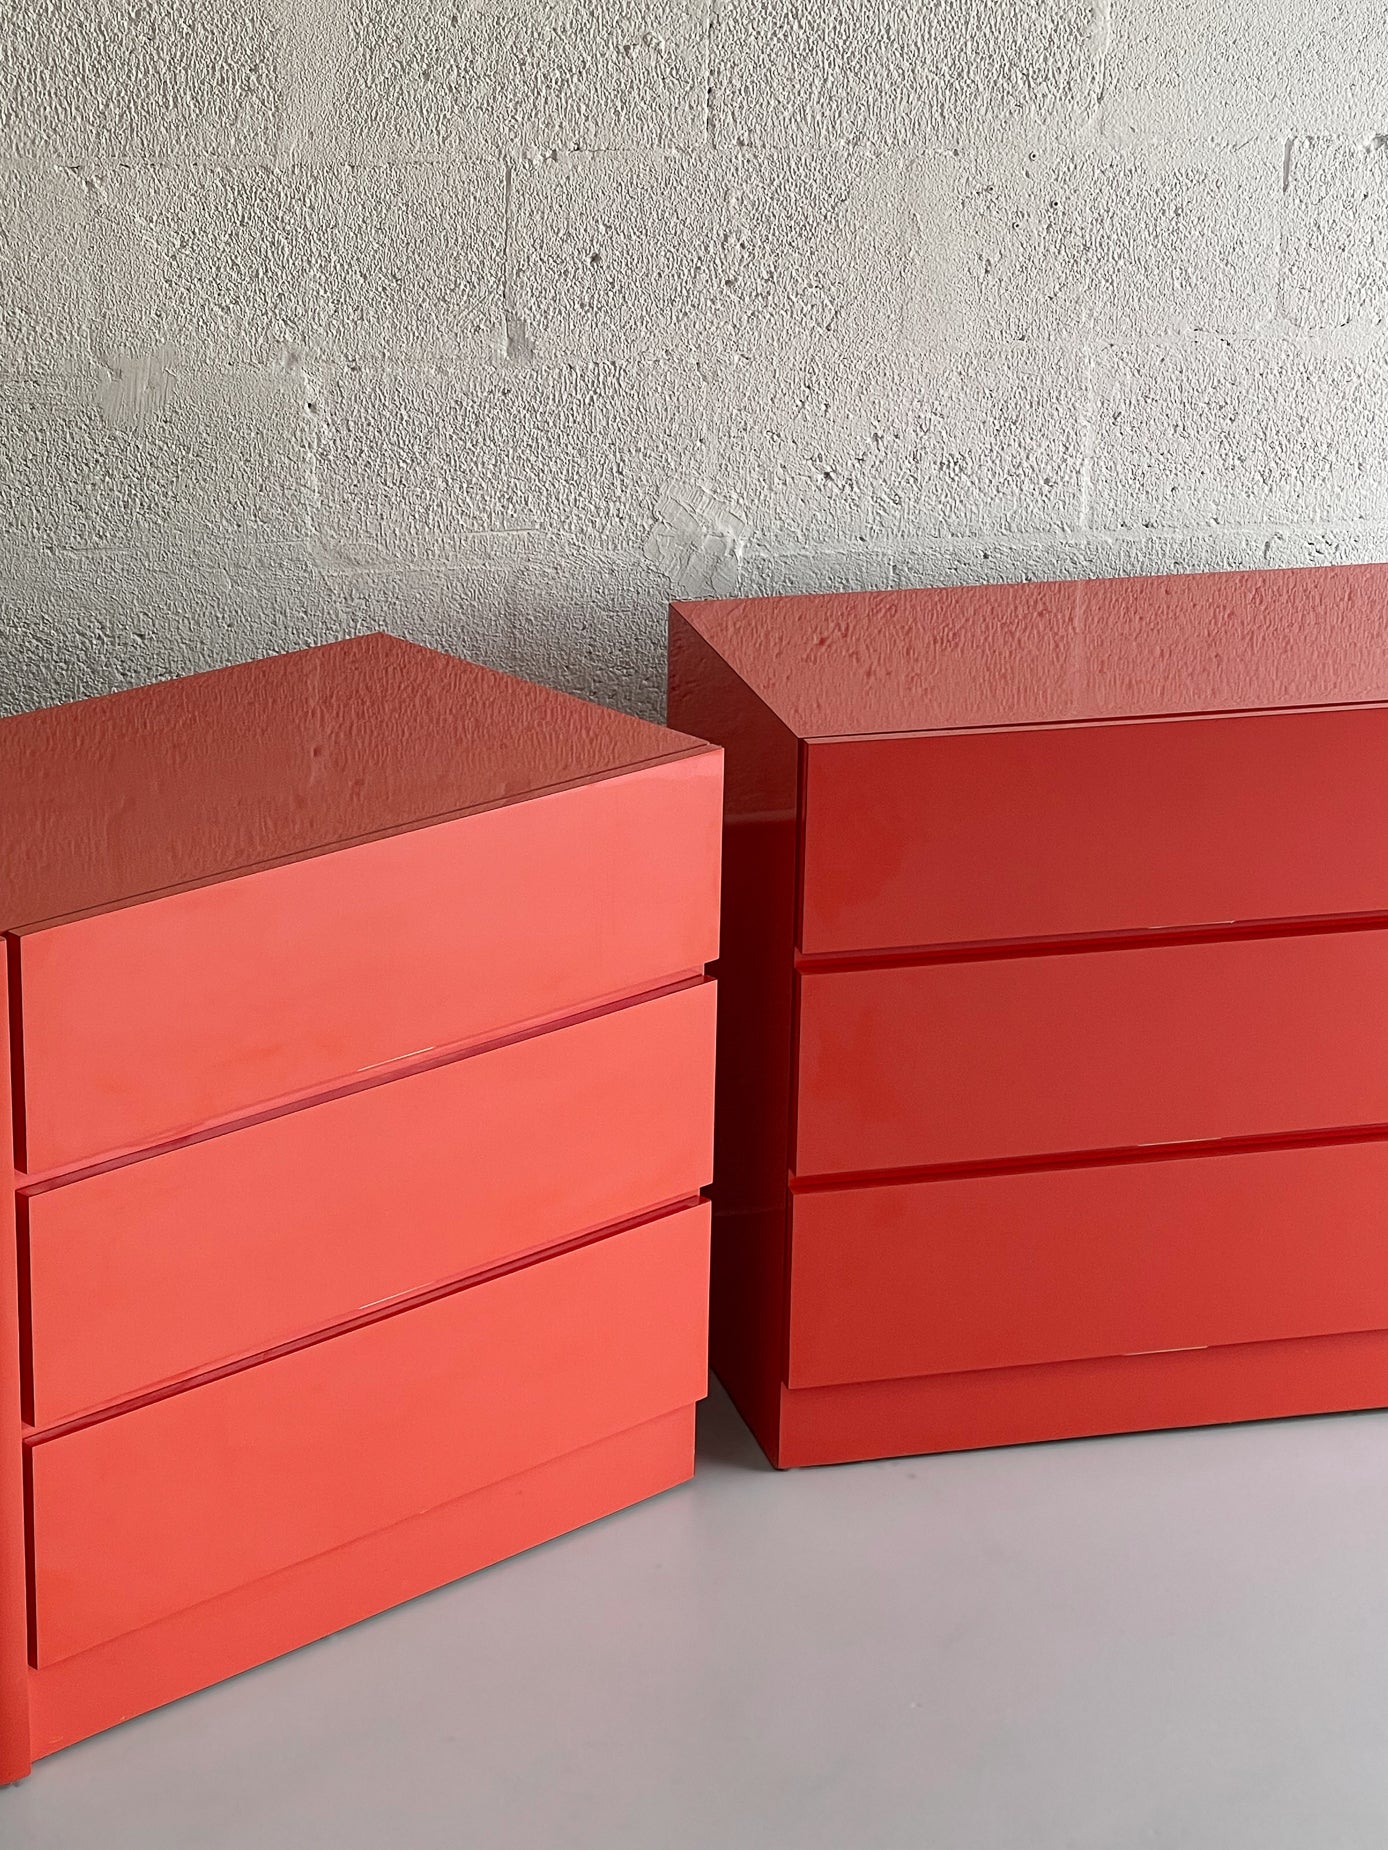 Large Coral Laminate Nightstands - a Pair